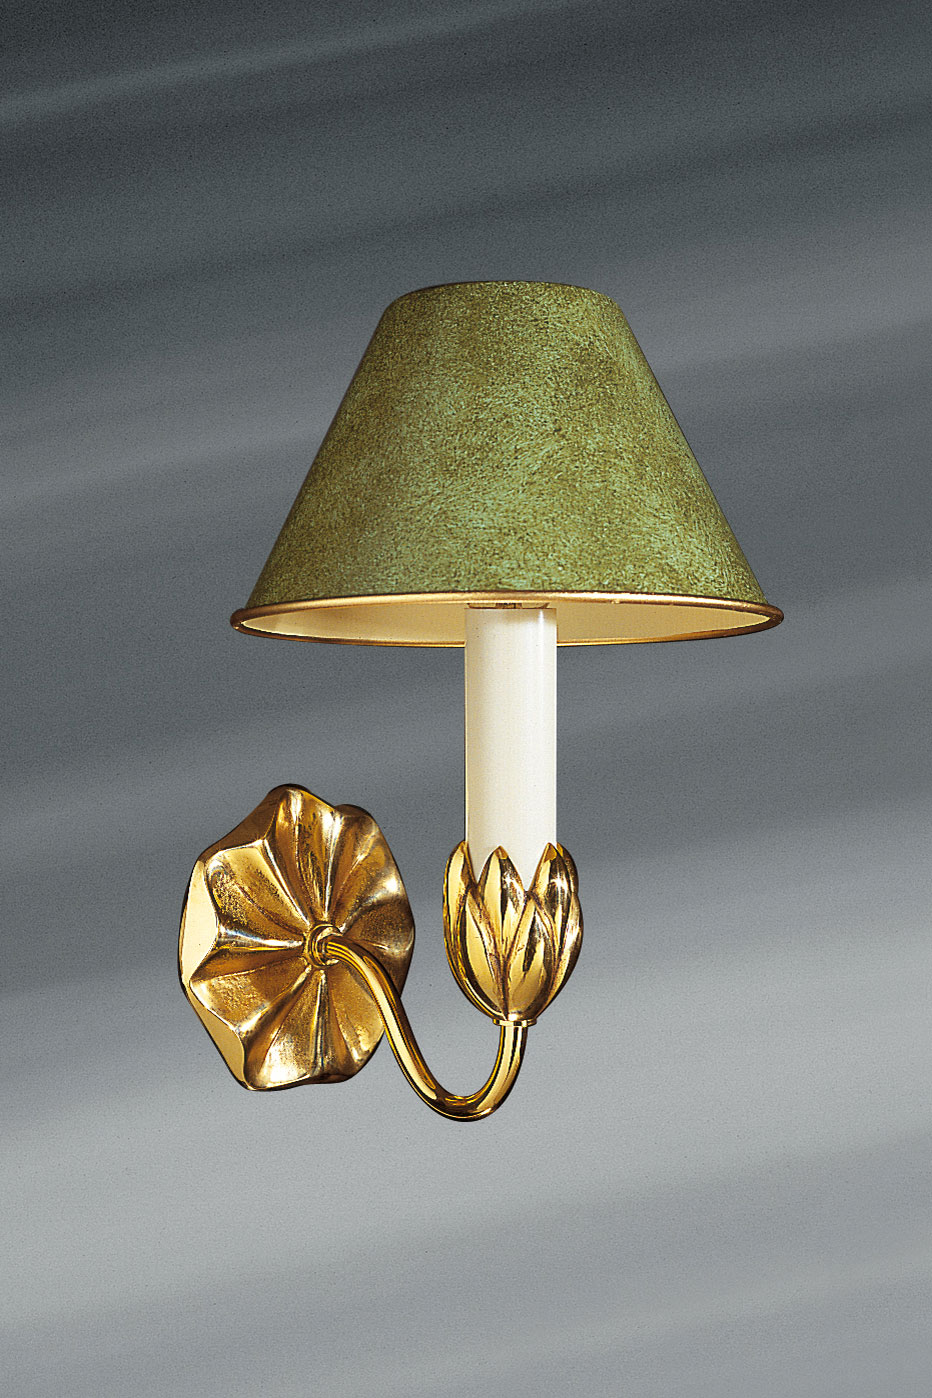 Nymphéa wall light in gold and green metal. Lucien Gau. 